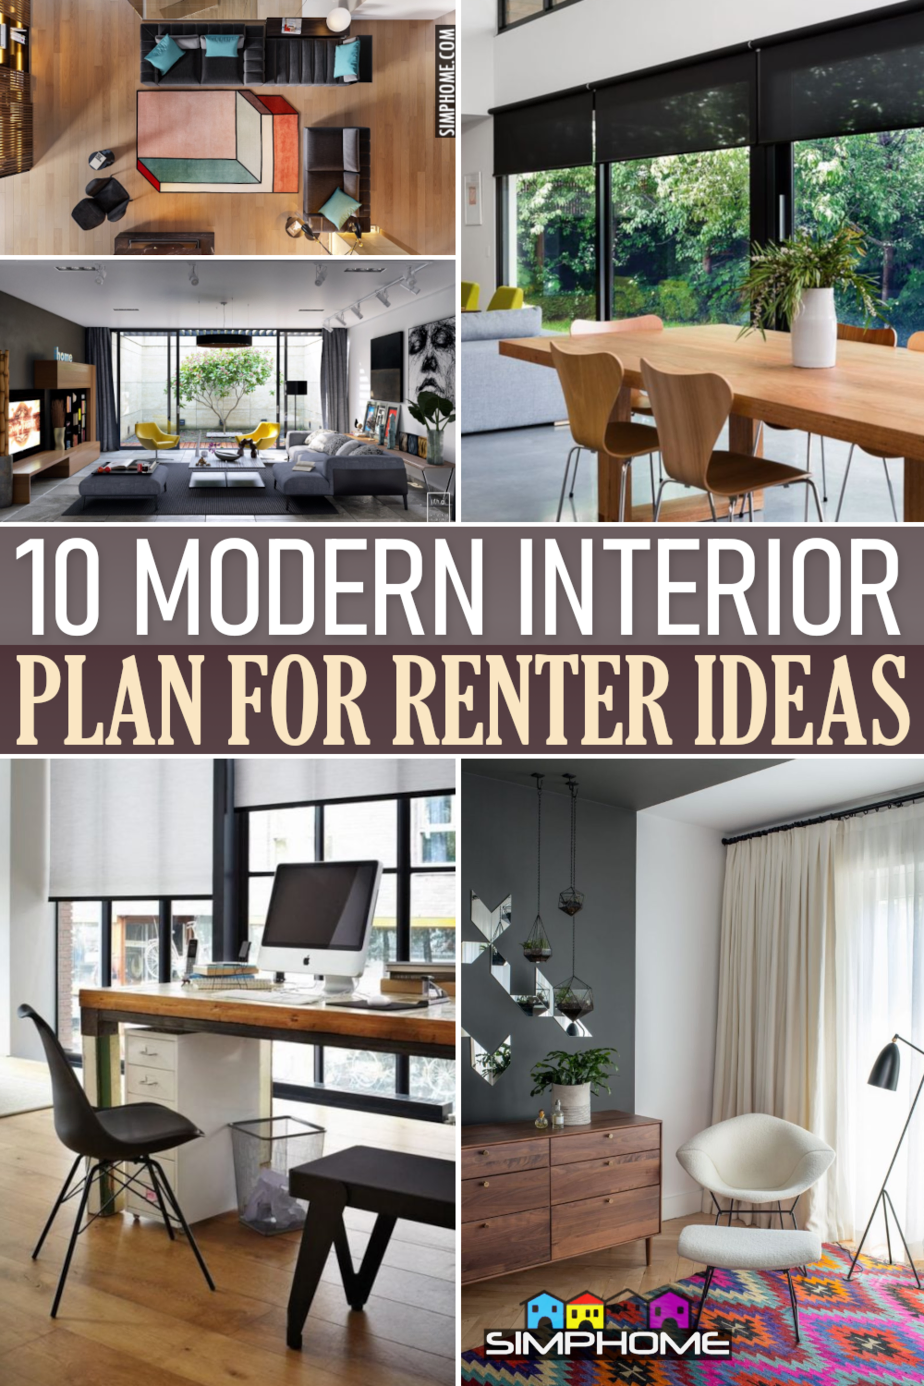 10 Modern Interior Plan for Renters via Simphome.comFeatured